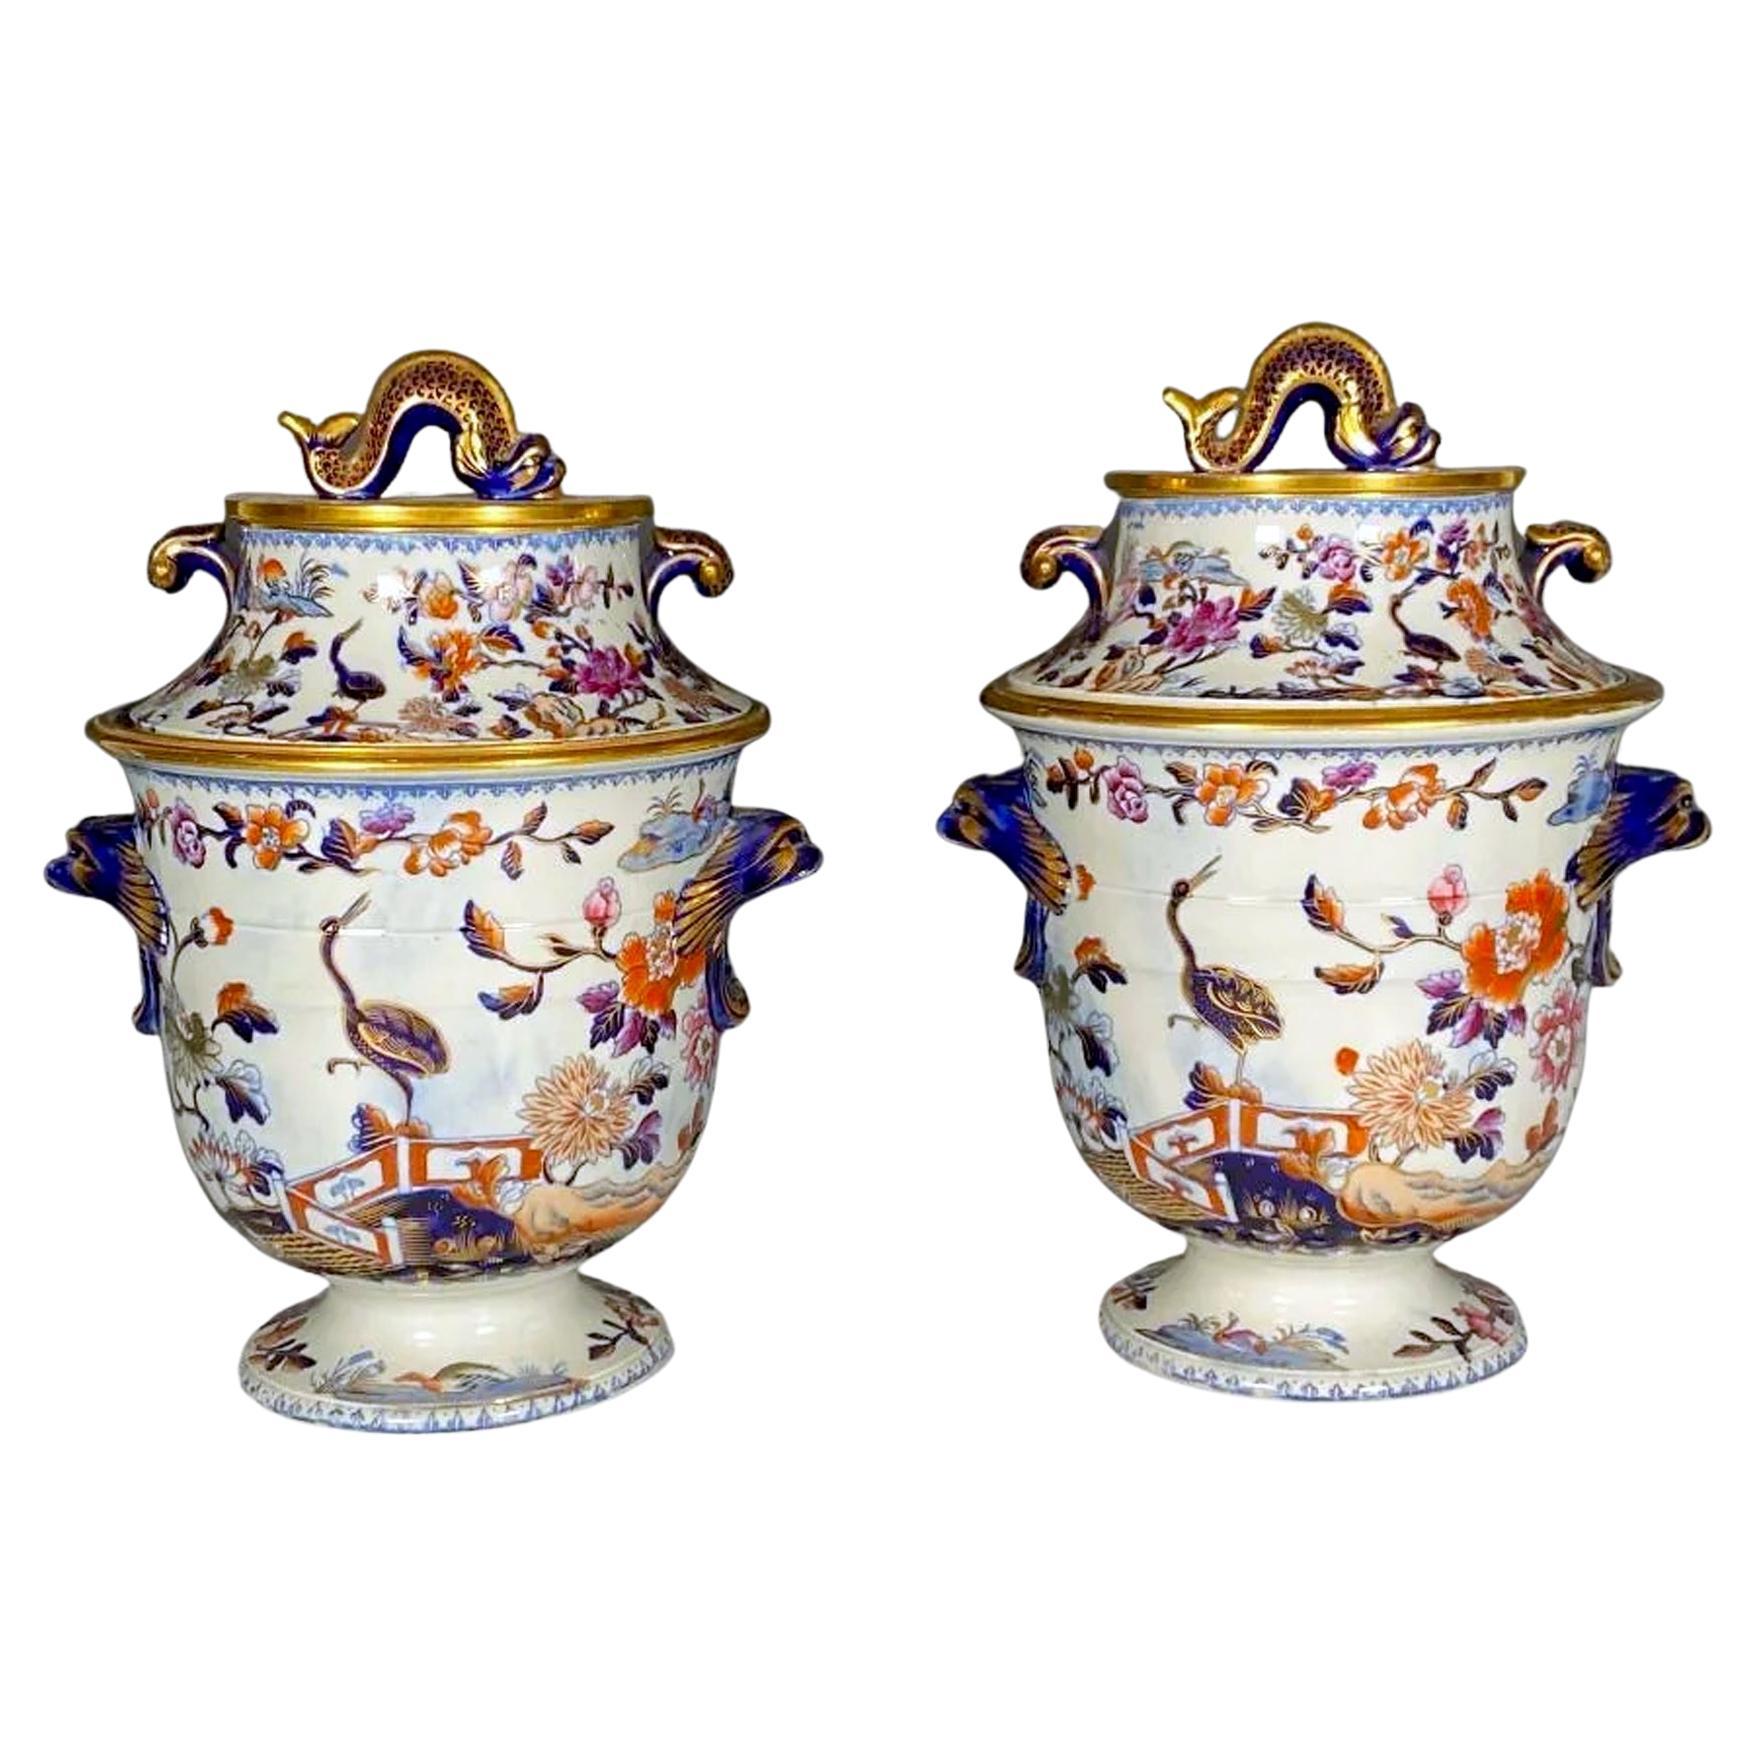 Davenport Stone China Chinoiserie Fruit Coolers in "Stork" Pattern